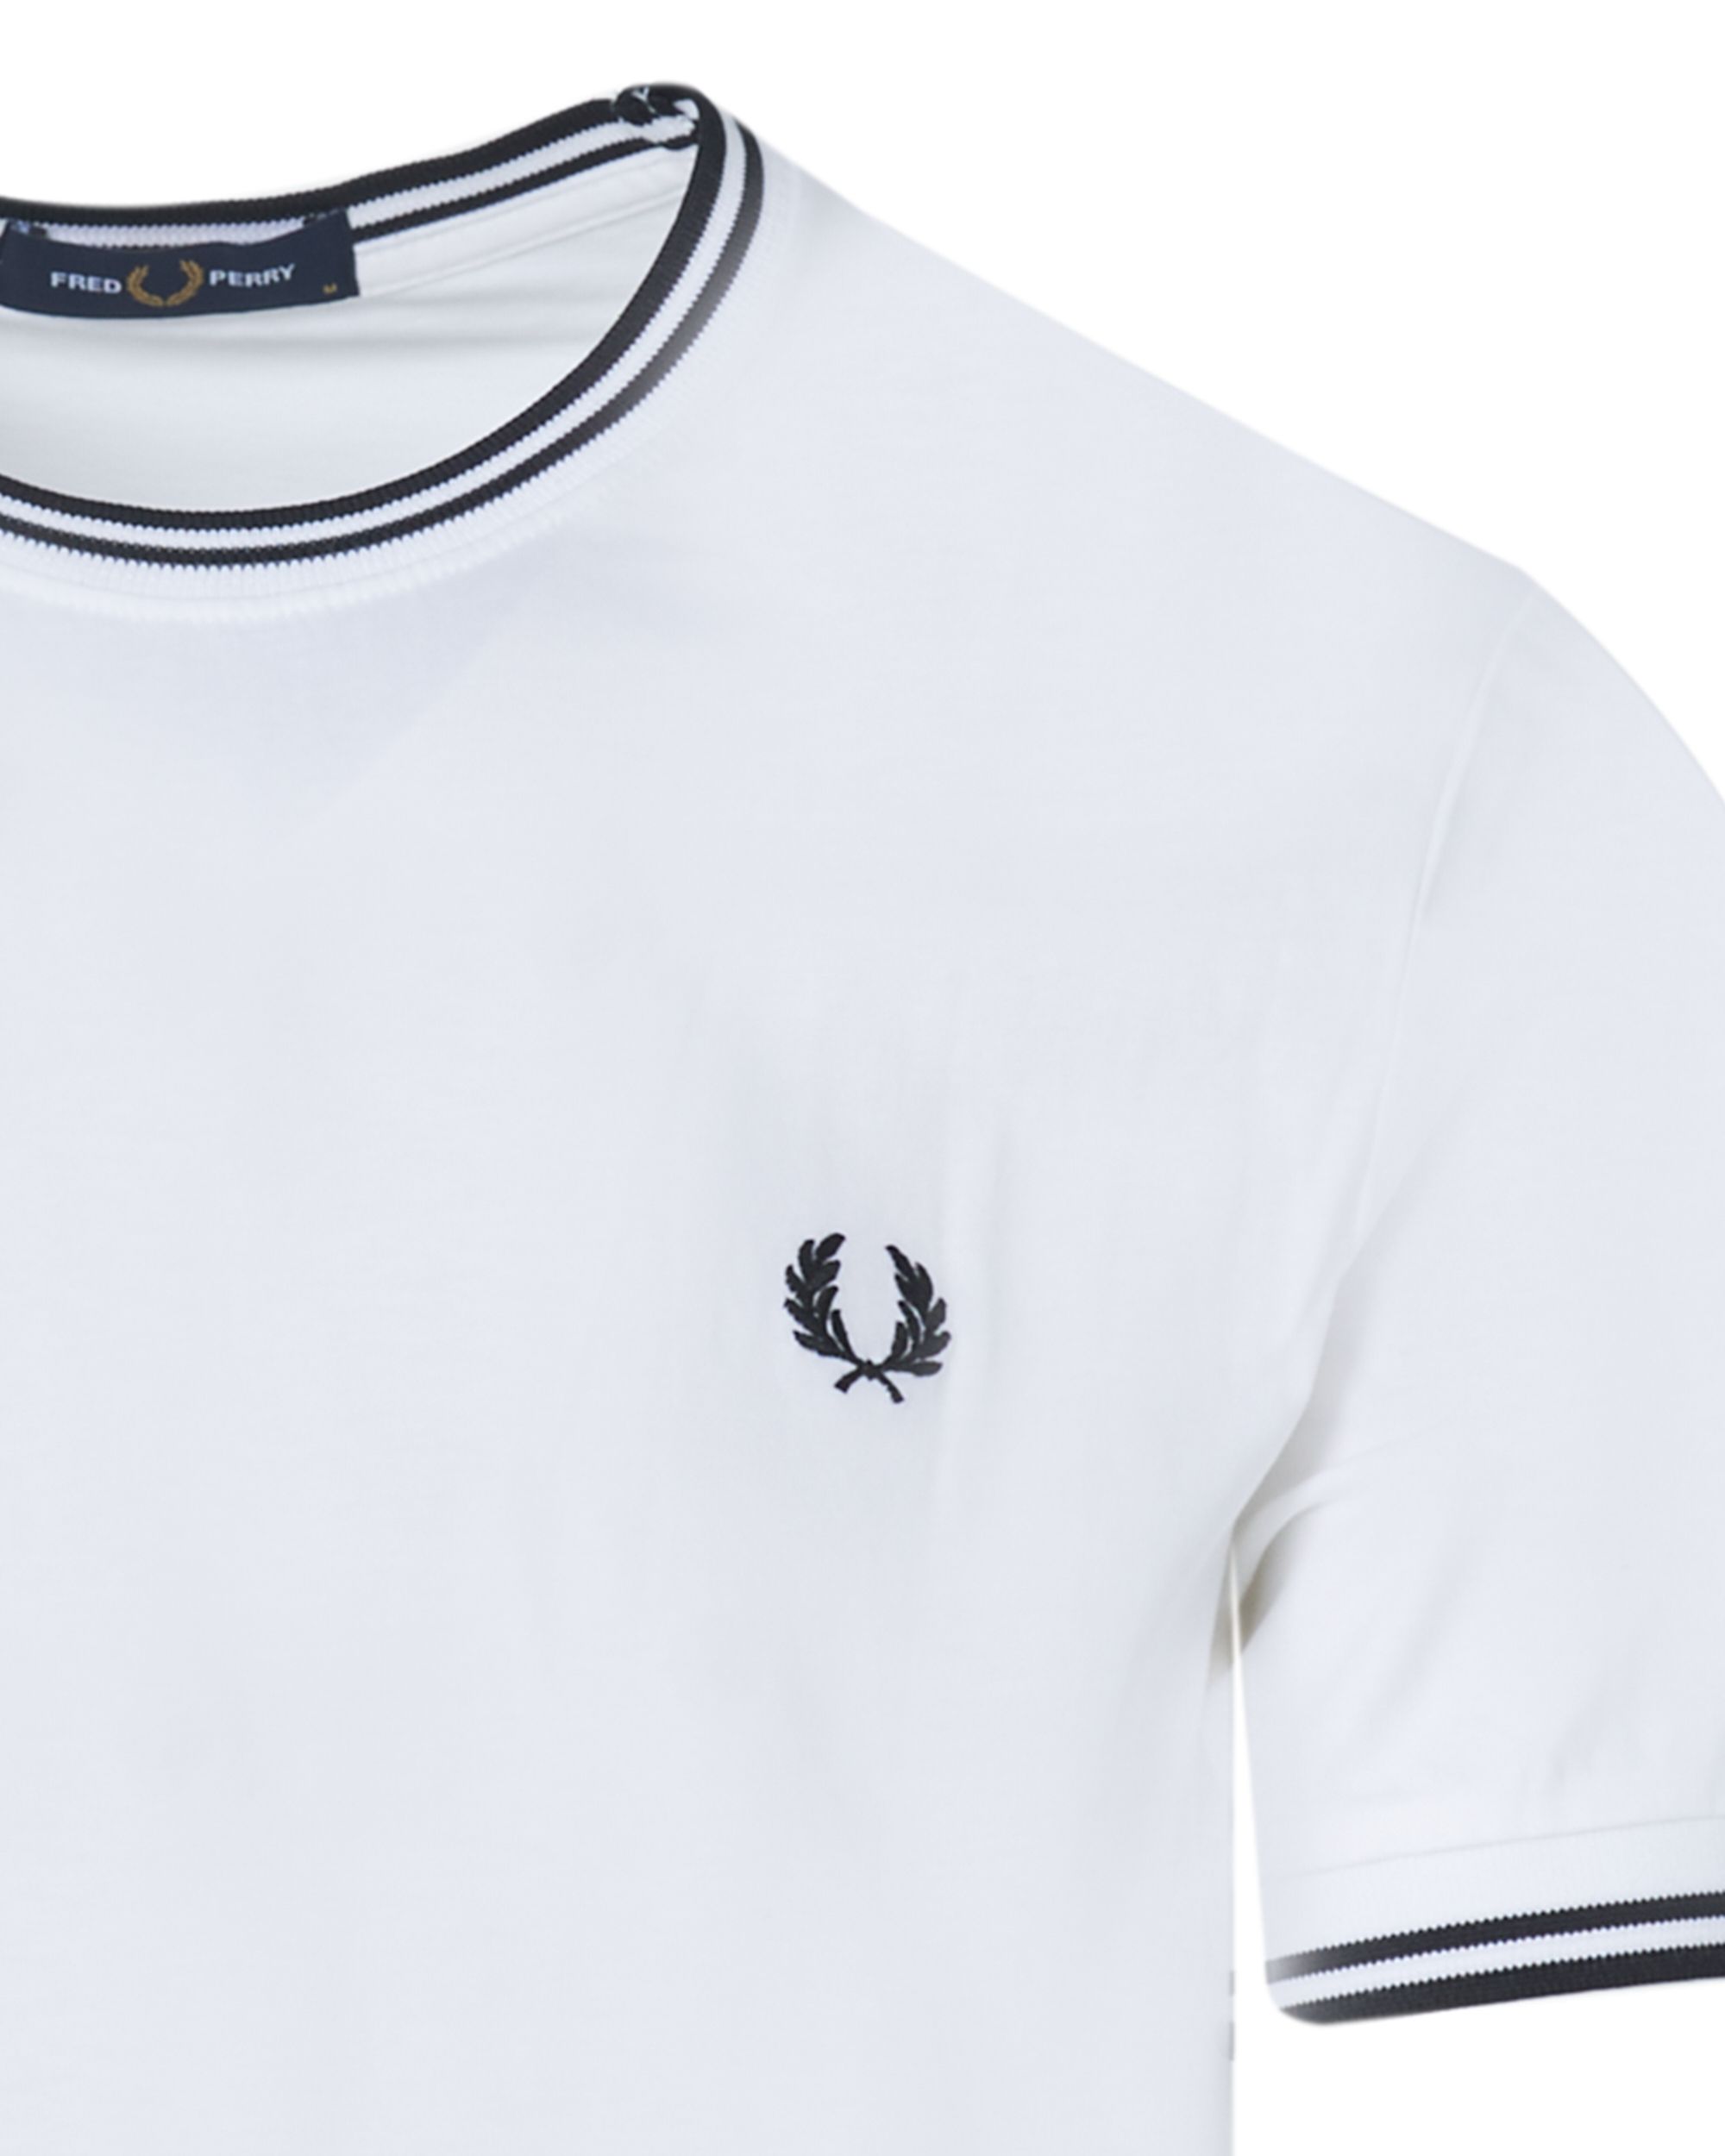 Fred Perry T-shirt KM Wit 083511-001-L